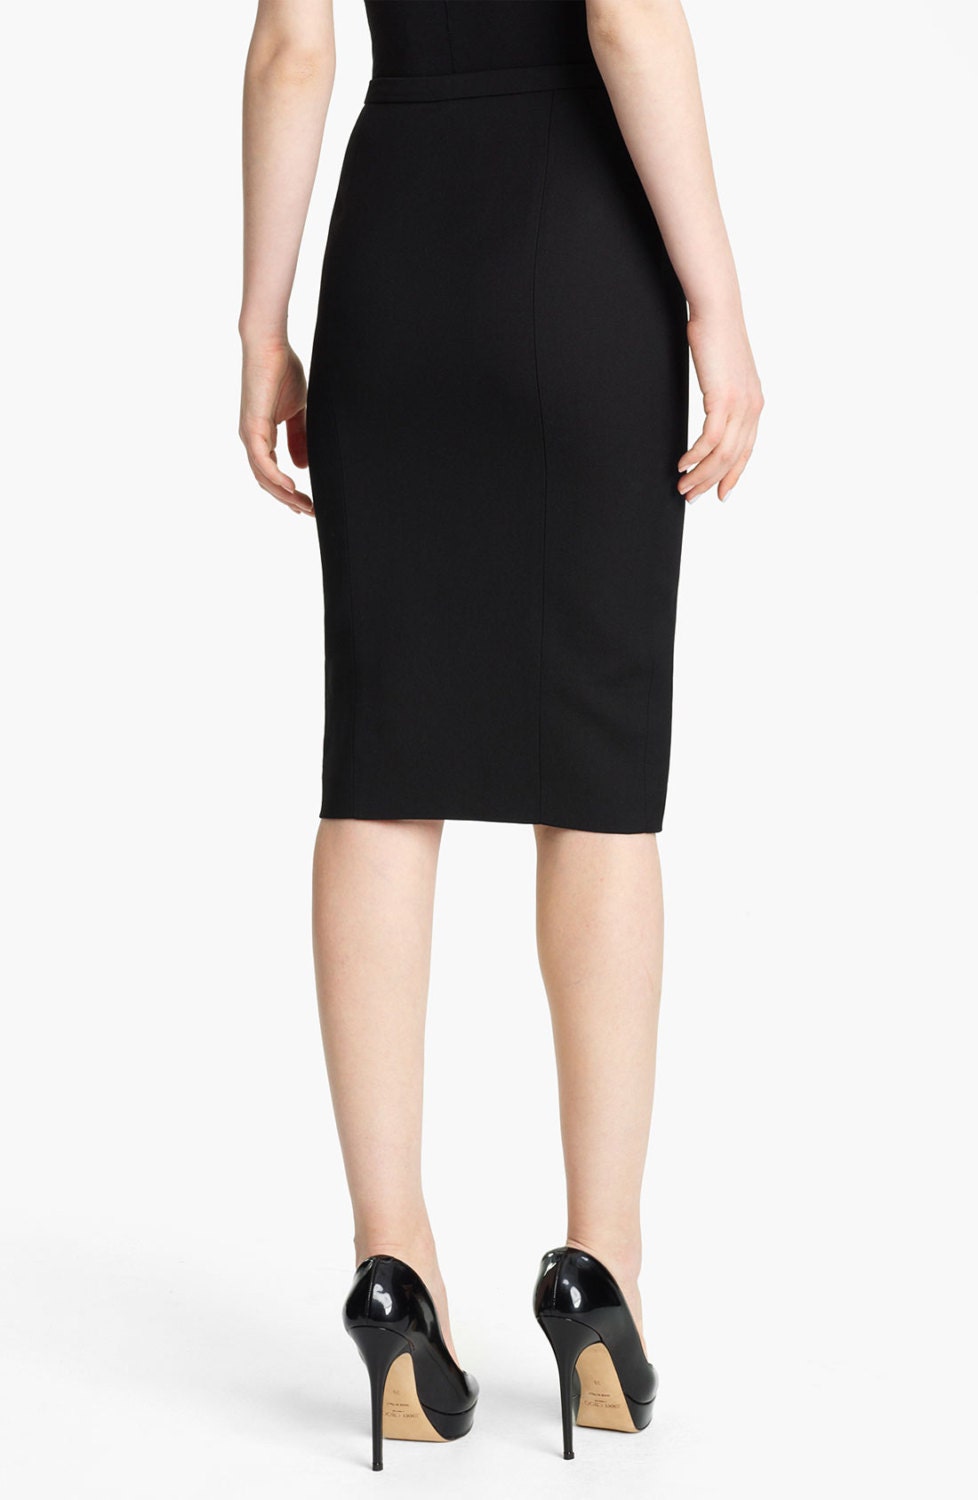 Classic pencil skirt with front slit high quality by Gorgones